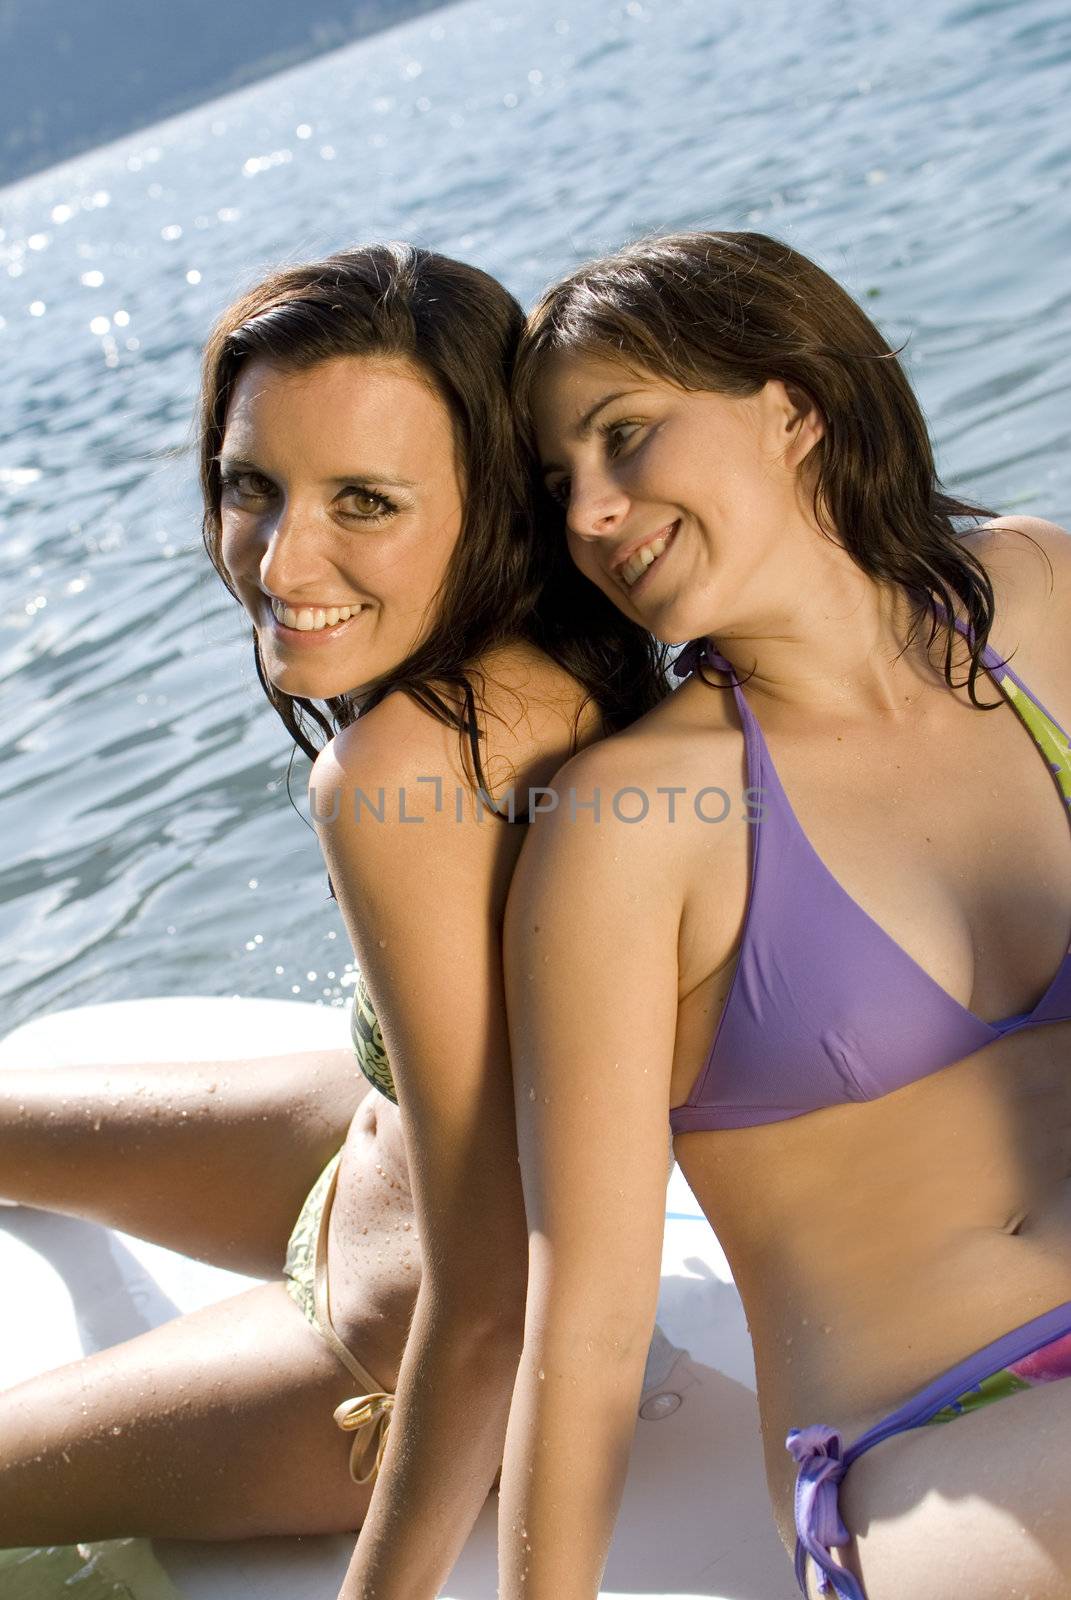 Girls having fun and relaxing on surfboard at the lake of Zell am See, Austria